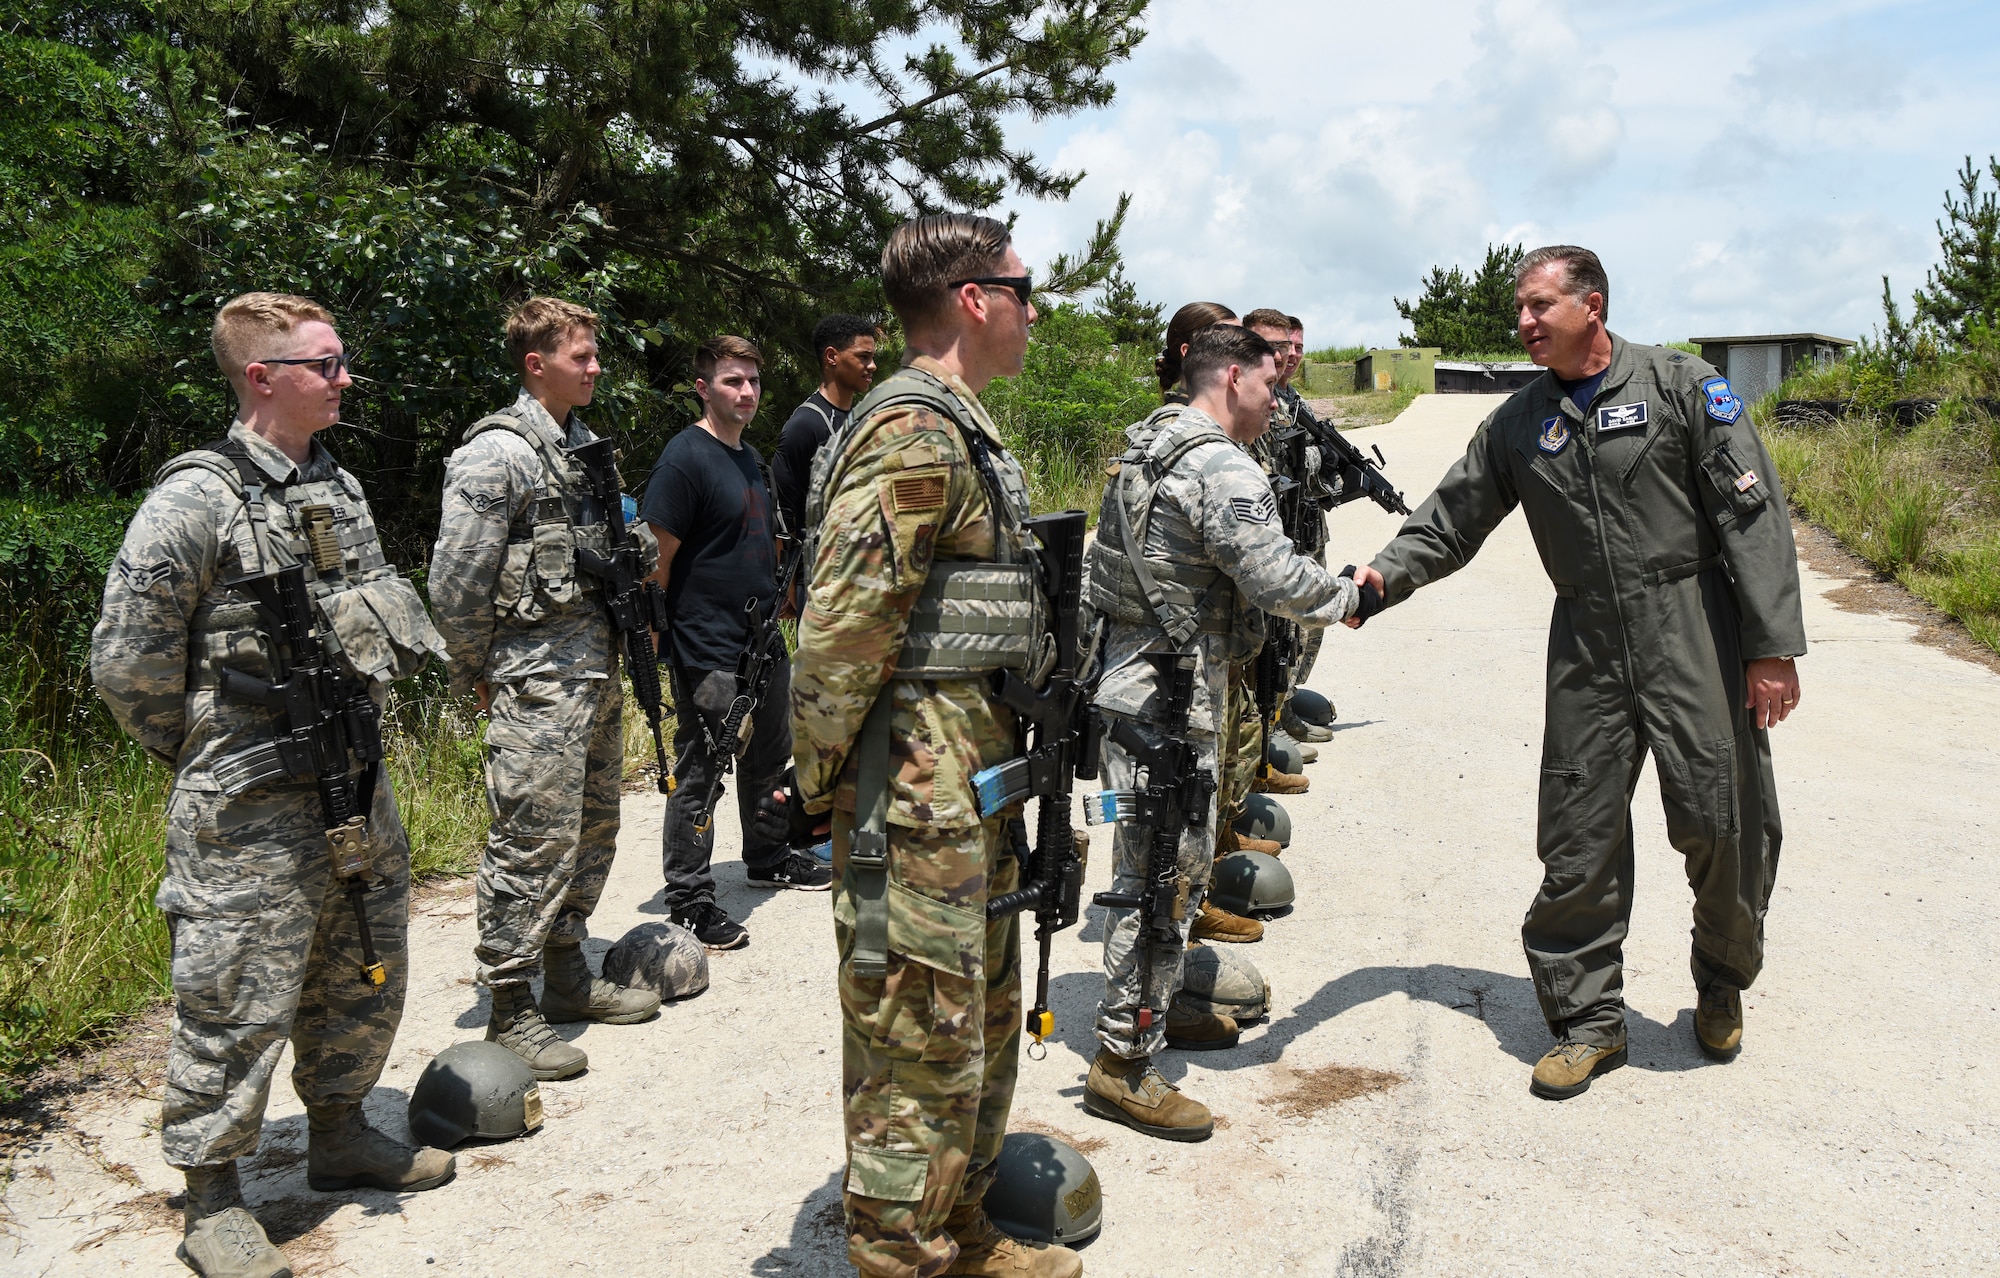 U.S. Air Force Brig. Gen. David Eaglin (right), 7th Air Force vice commander, shakes hands with members from the 8th Security Forces Squadron during an immersion tour at Kunsan Air Base, Republic of Korea, July 12, 2019. Eaglin introduced himself and recognized some of the Airmen from the Wolf Pack for their professionalism and readiness. (U.S. Air Force photo by Staff Sgt. Joshua Edwards)